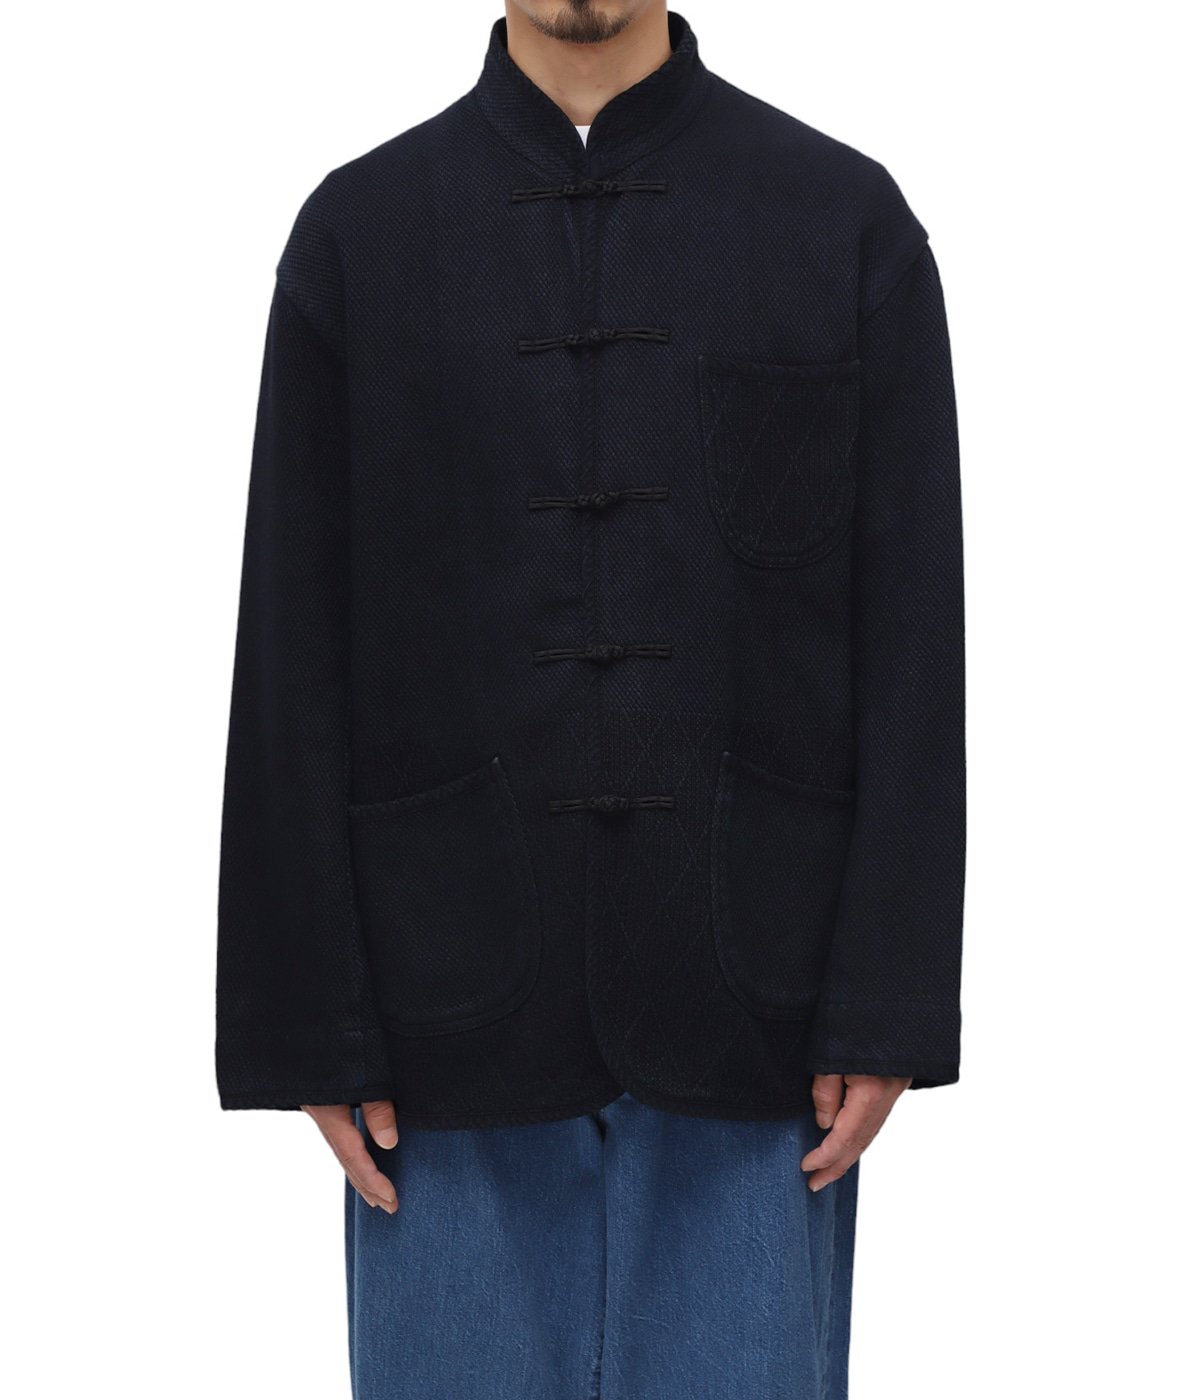 Porter Classic KENDO CHINESE JACKET チャイナ